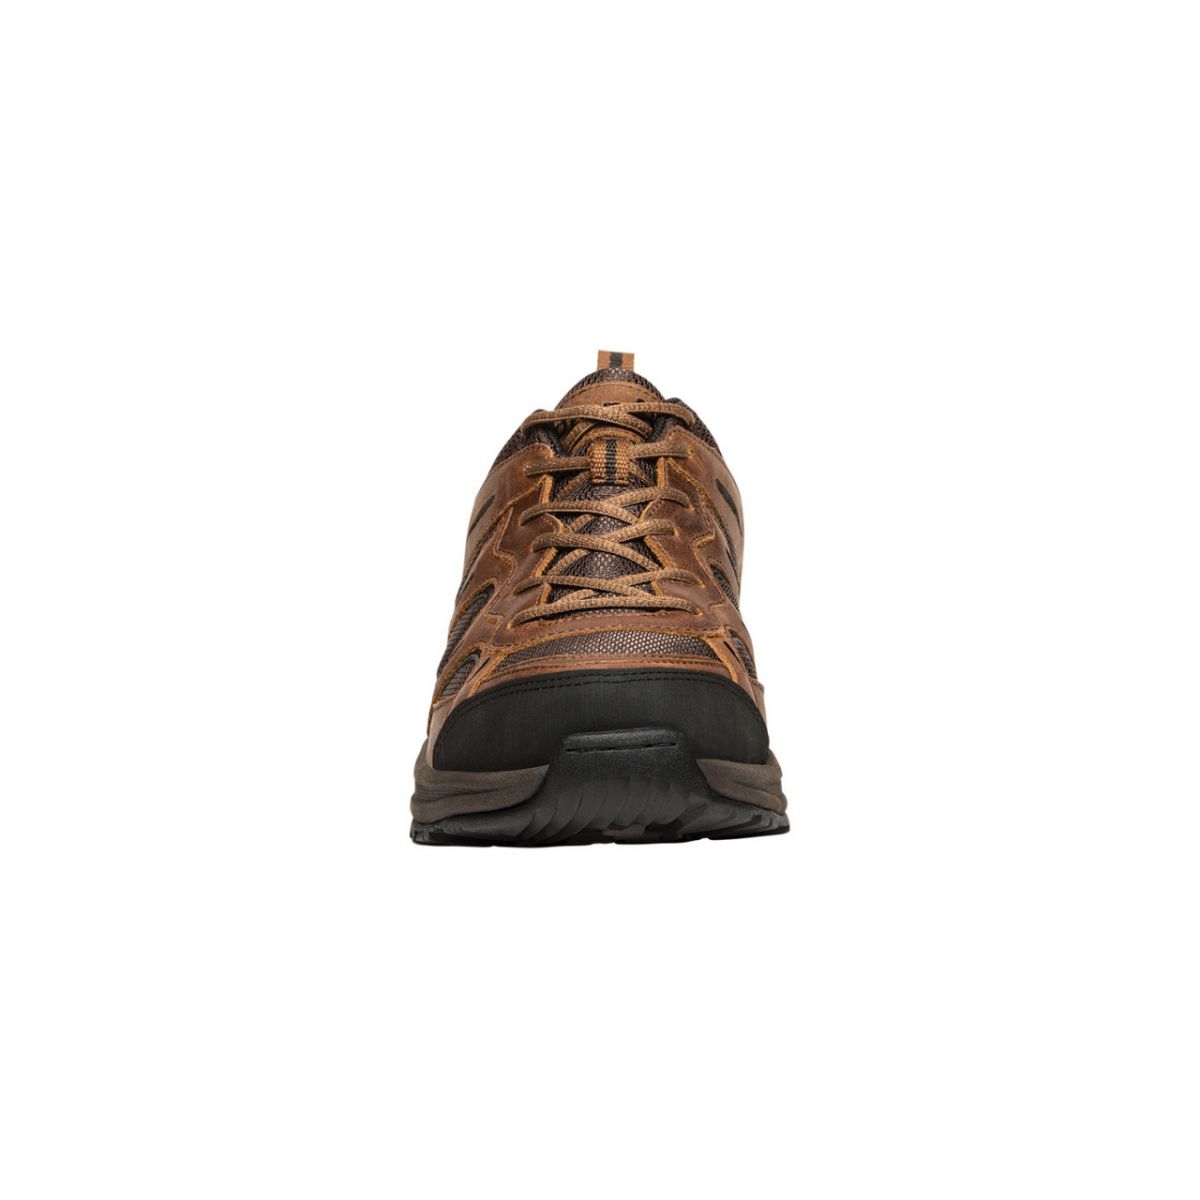 Propet Men's Connelly Hiking Shoe Brown - M5503BR BROWN - BROWN, 13-E